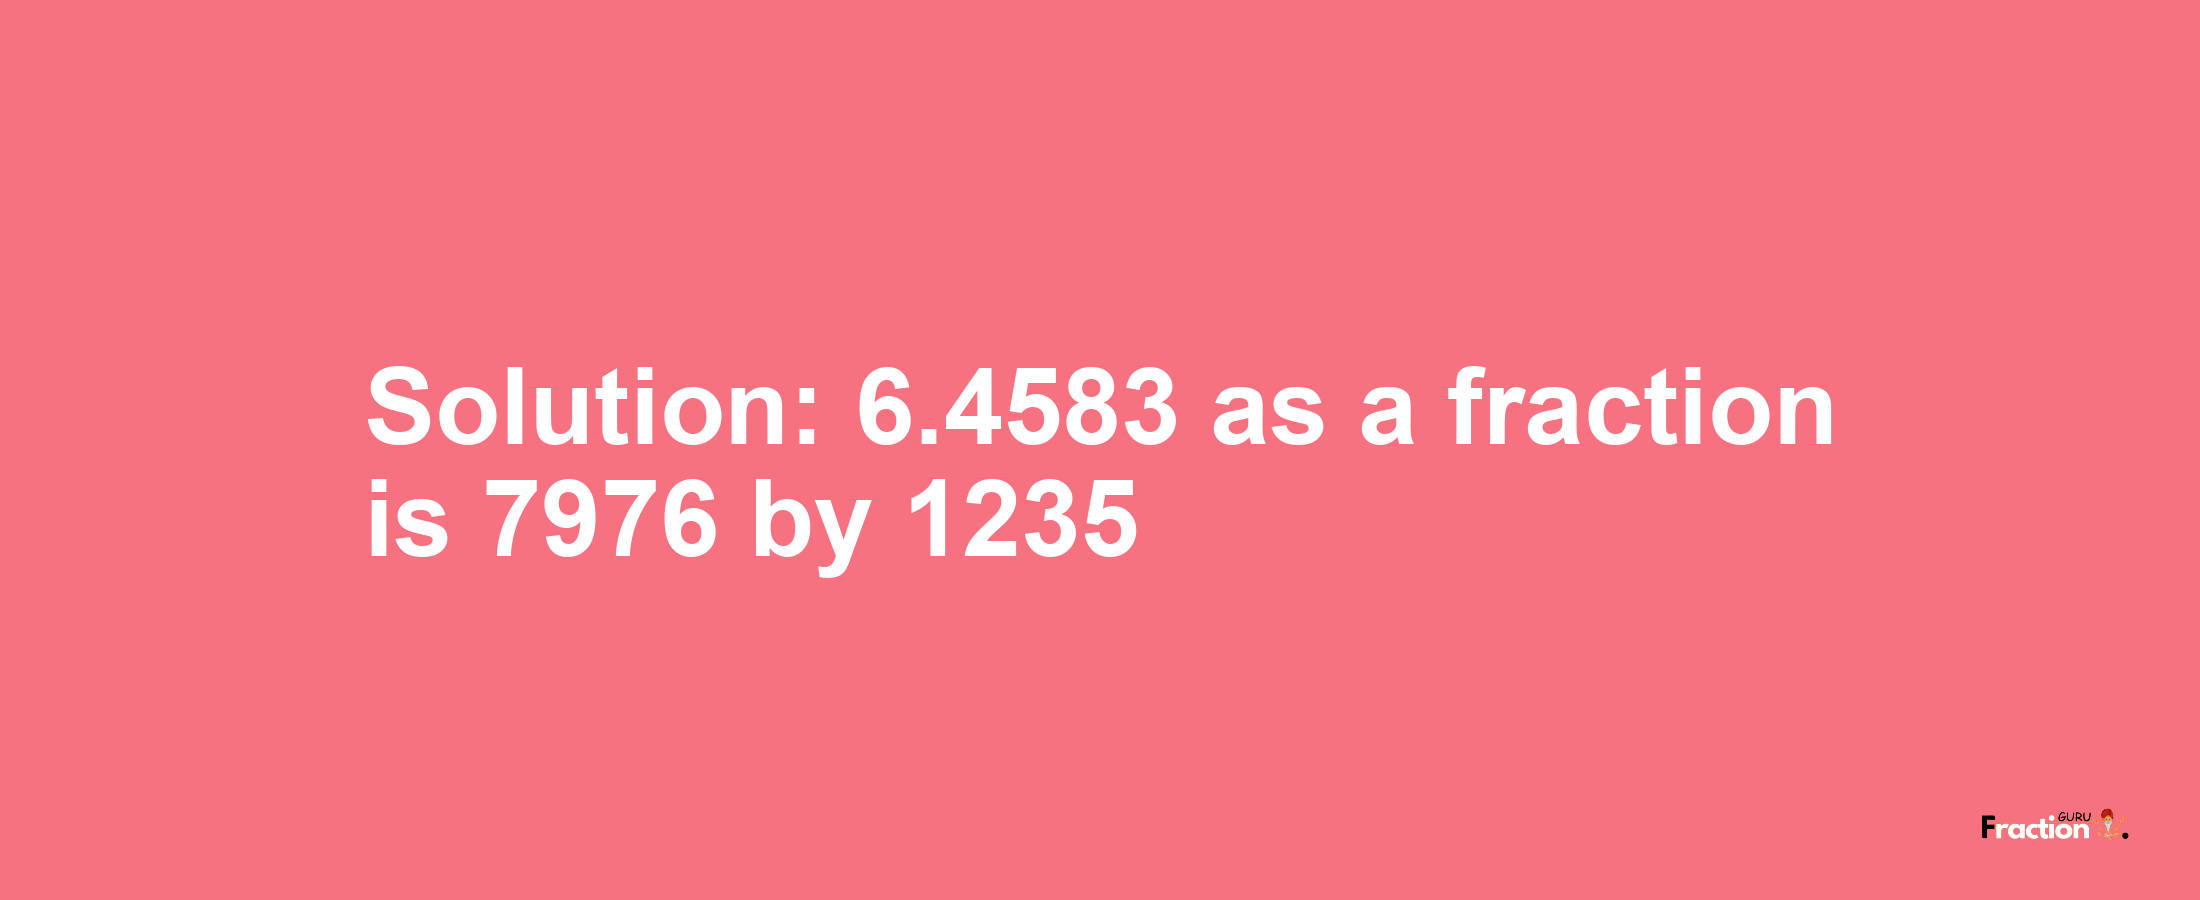 Solution:6.4583 as a fraction is 7976/1235